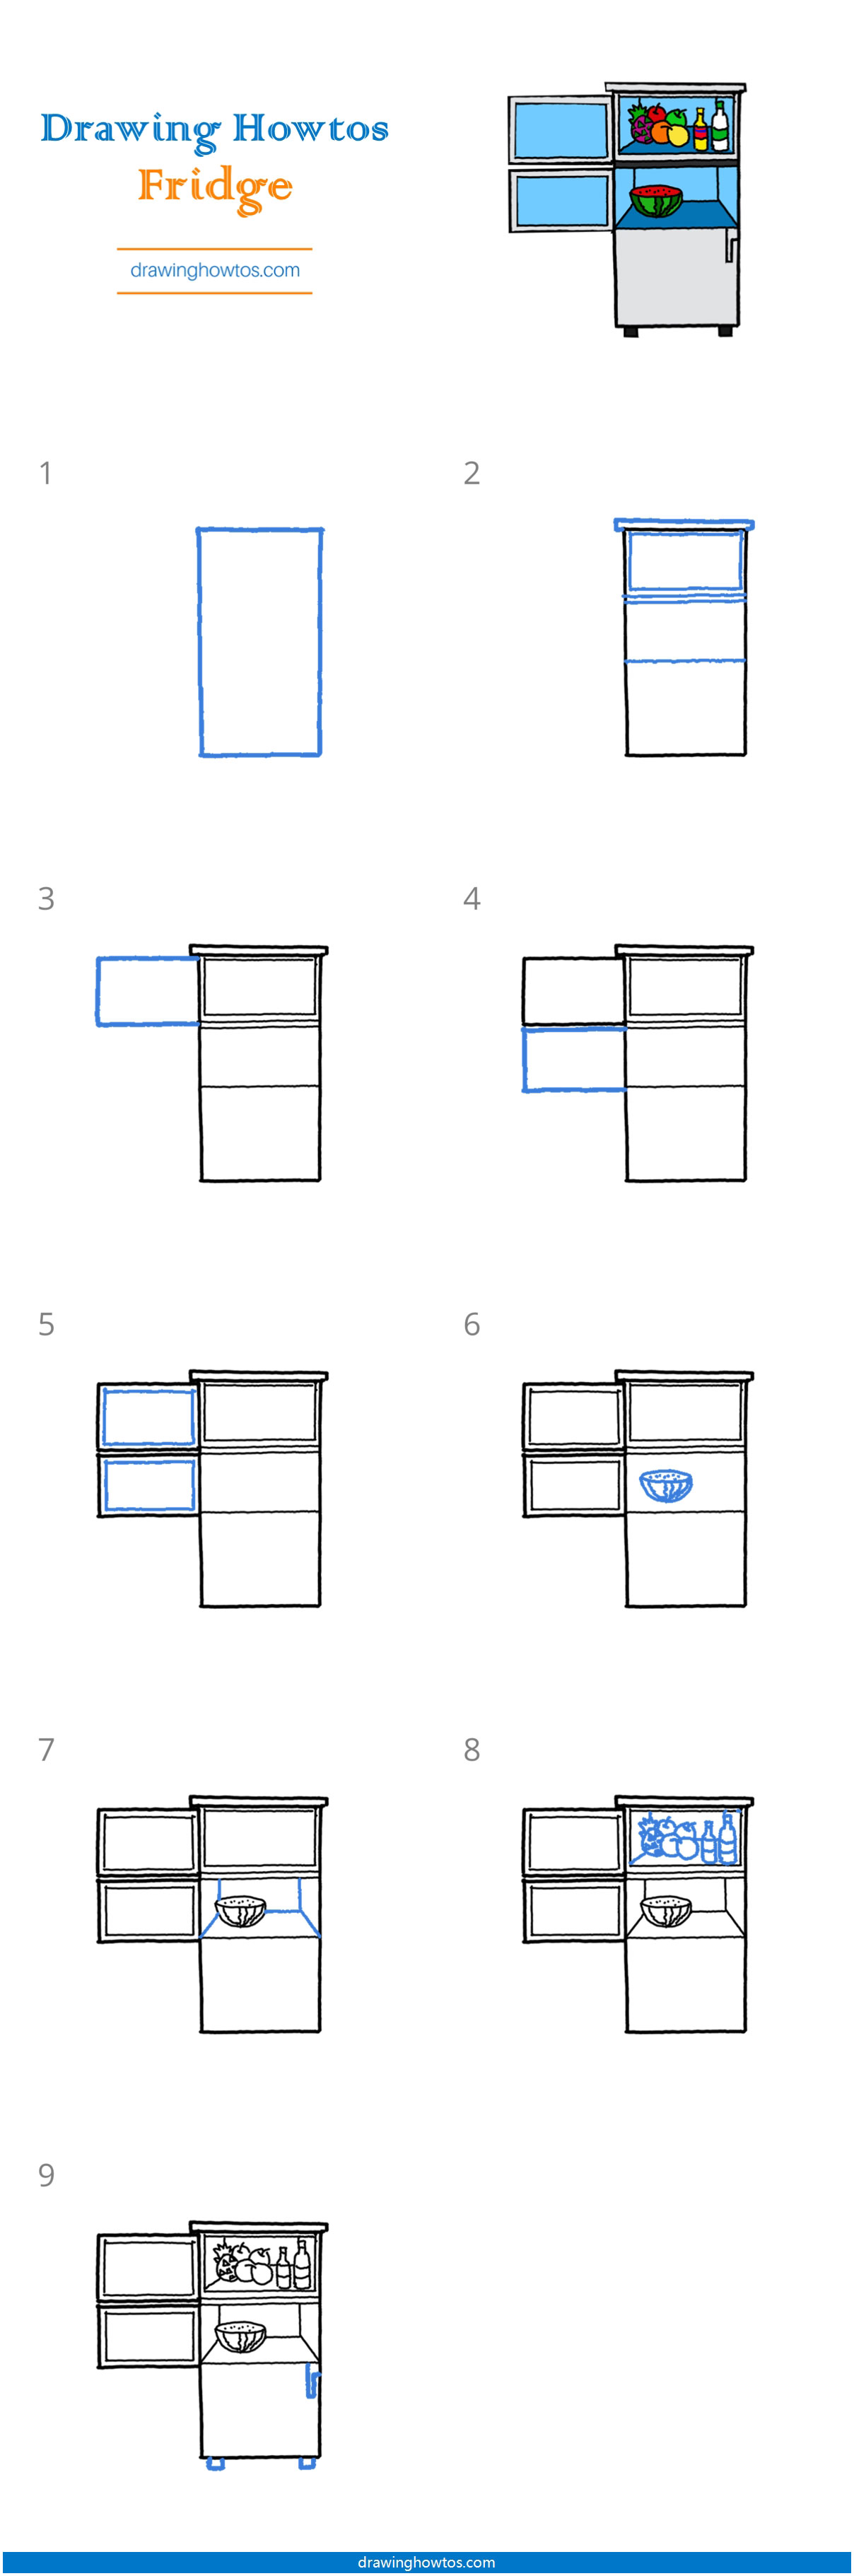 How To Draw A Fridge Step By Step Easy Drawing Guides Drawing Howtos